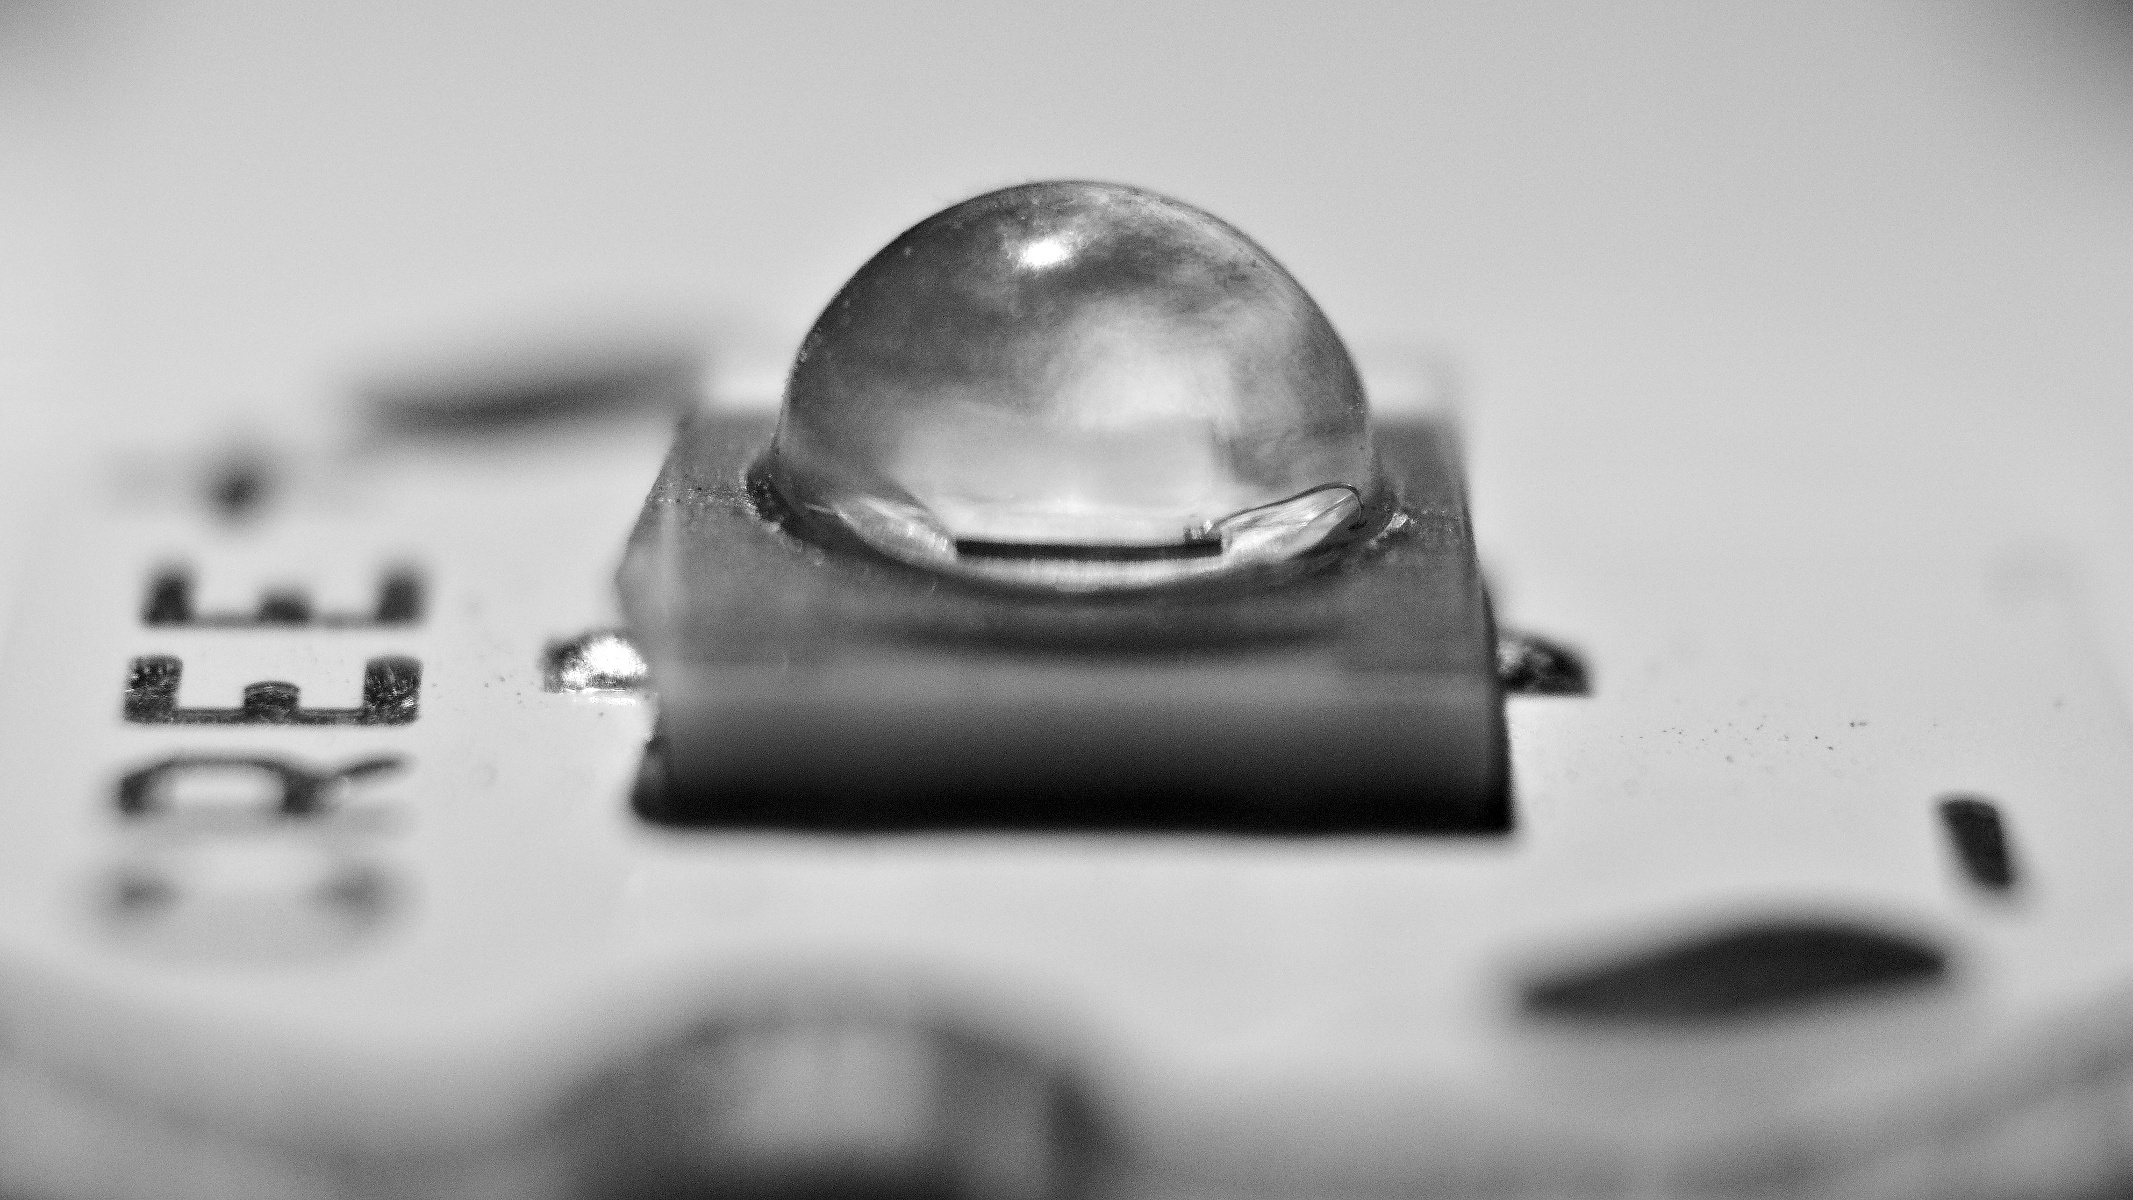 A black and white macro photo of an LED